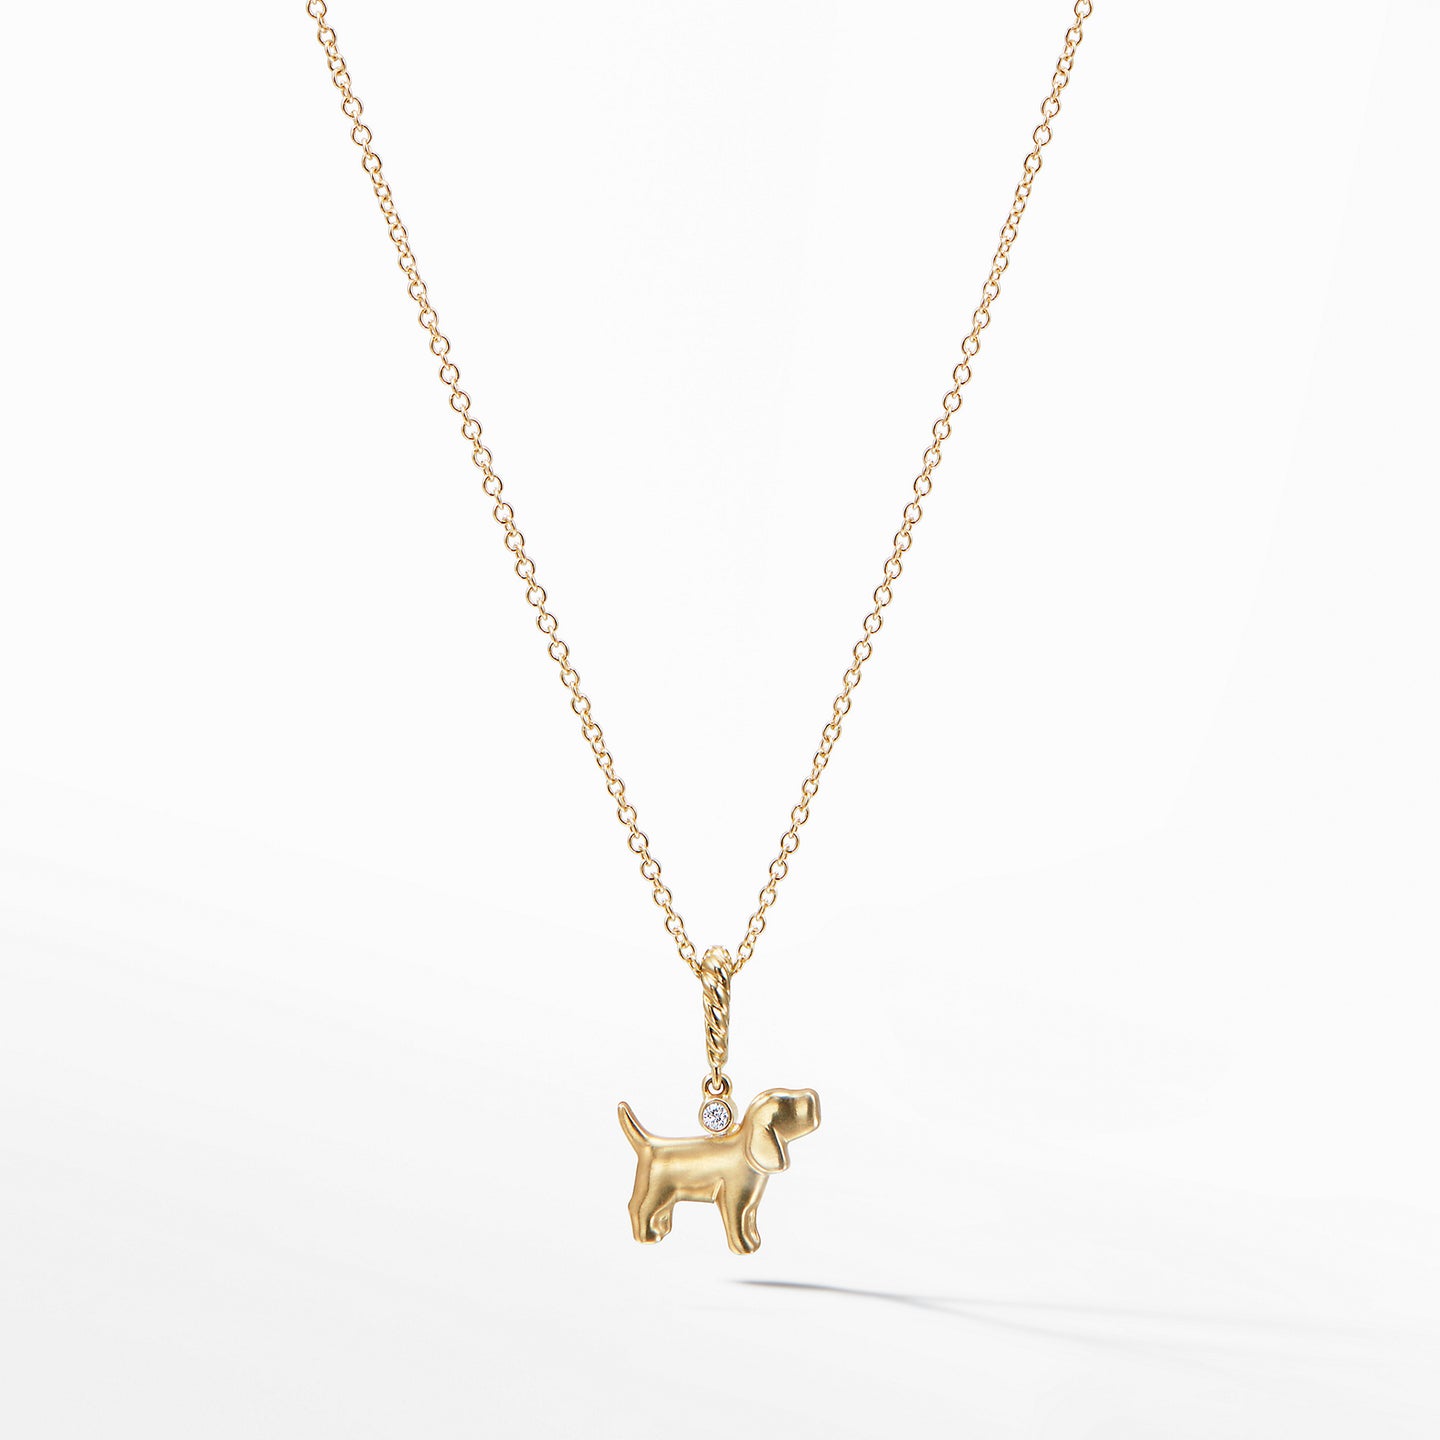 Cable Collectibles® Kids Dog Charm Necklace in 18K Gold with Diamonds